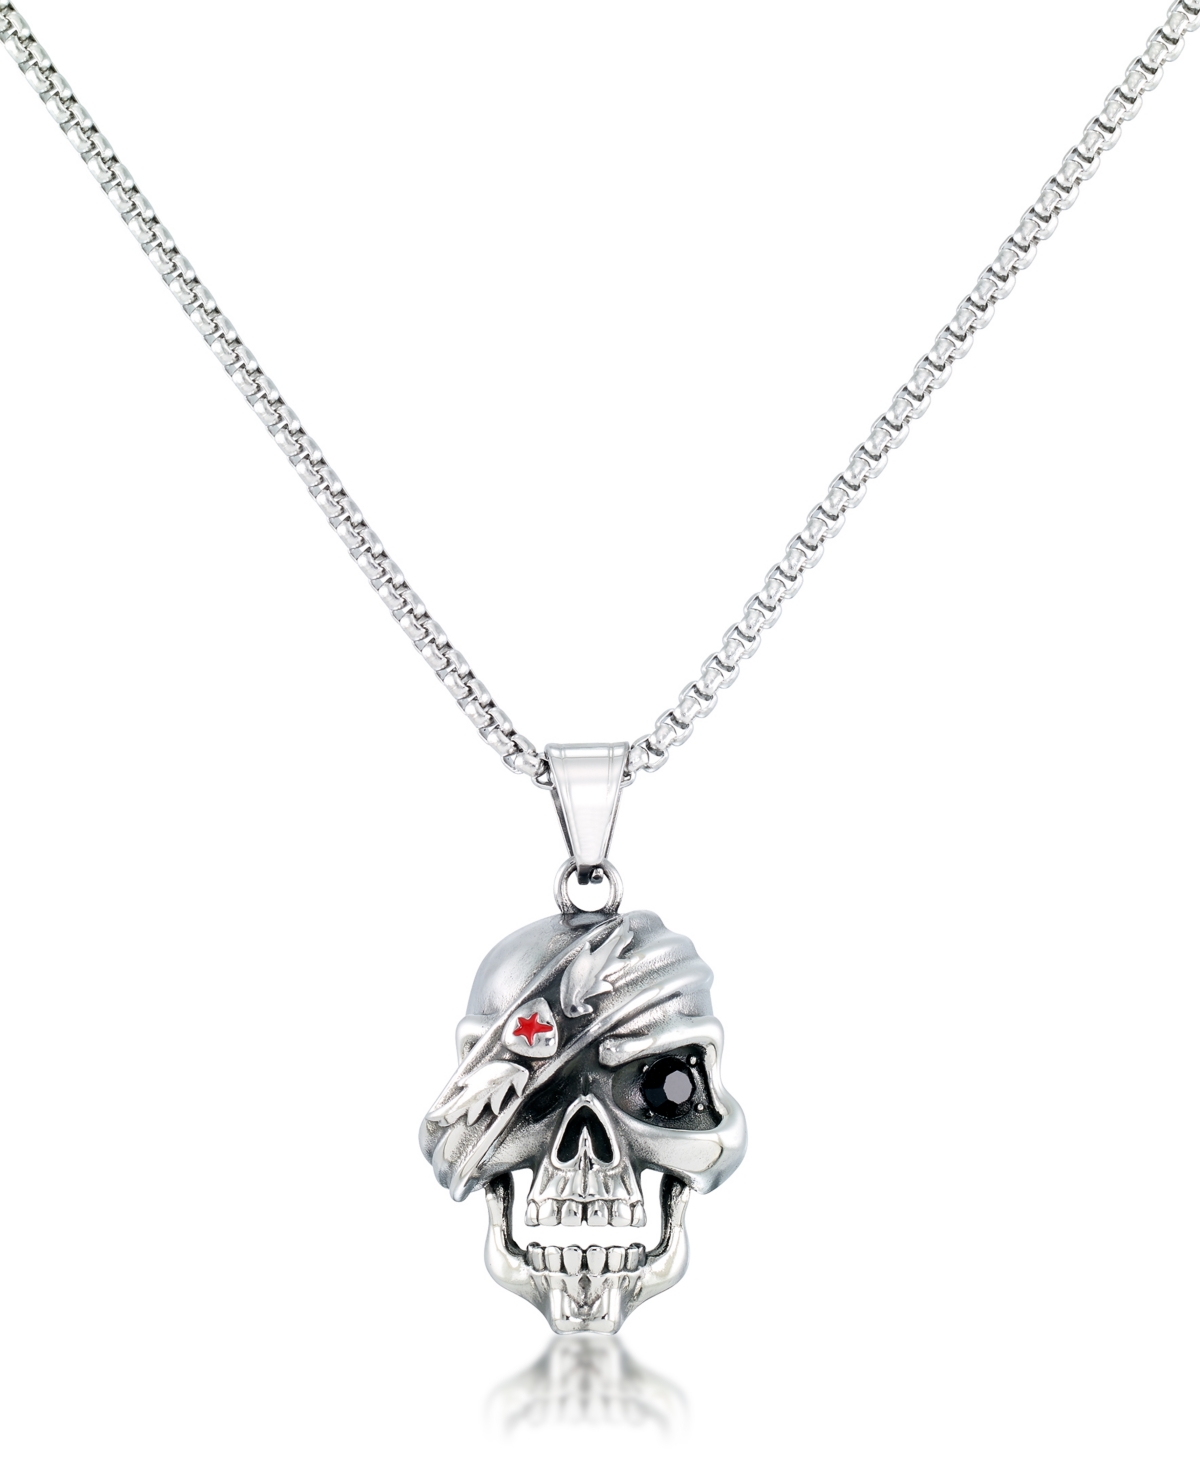 Men's Cubic Zirconia Pirate Skull 24" Pendant Necklace in Stainless Steel - Stainless Steel